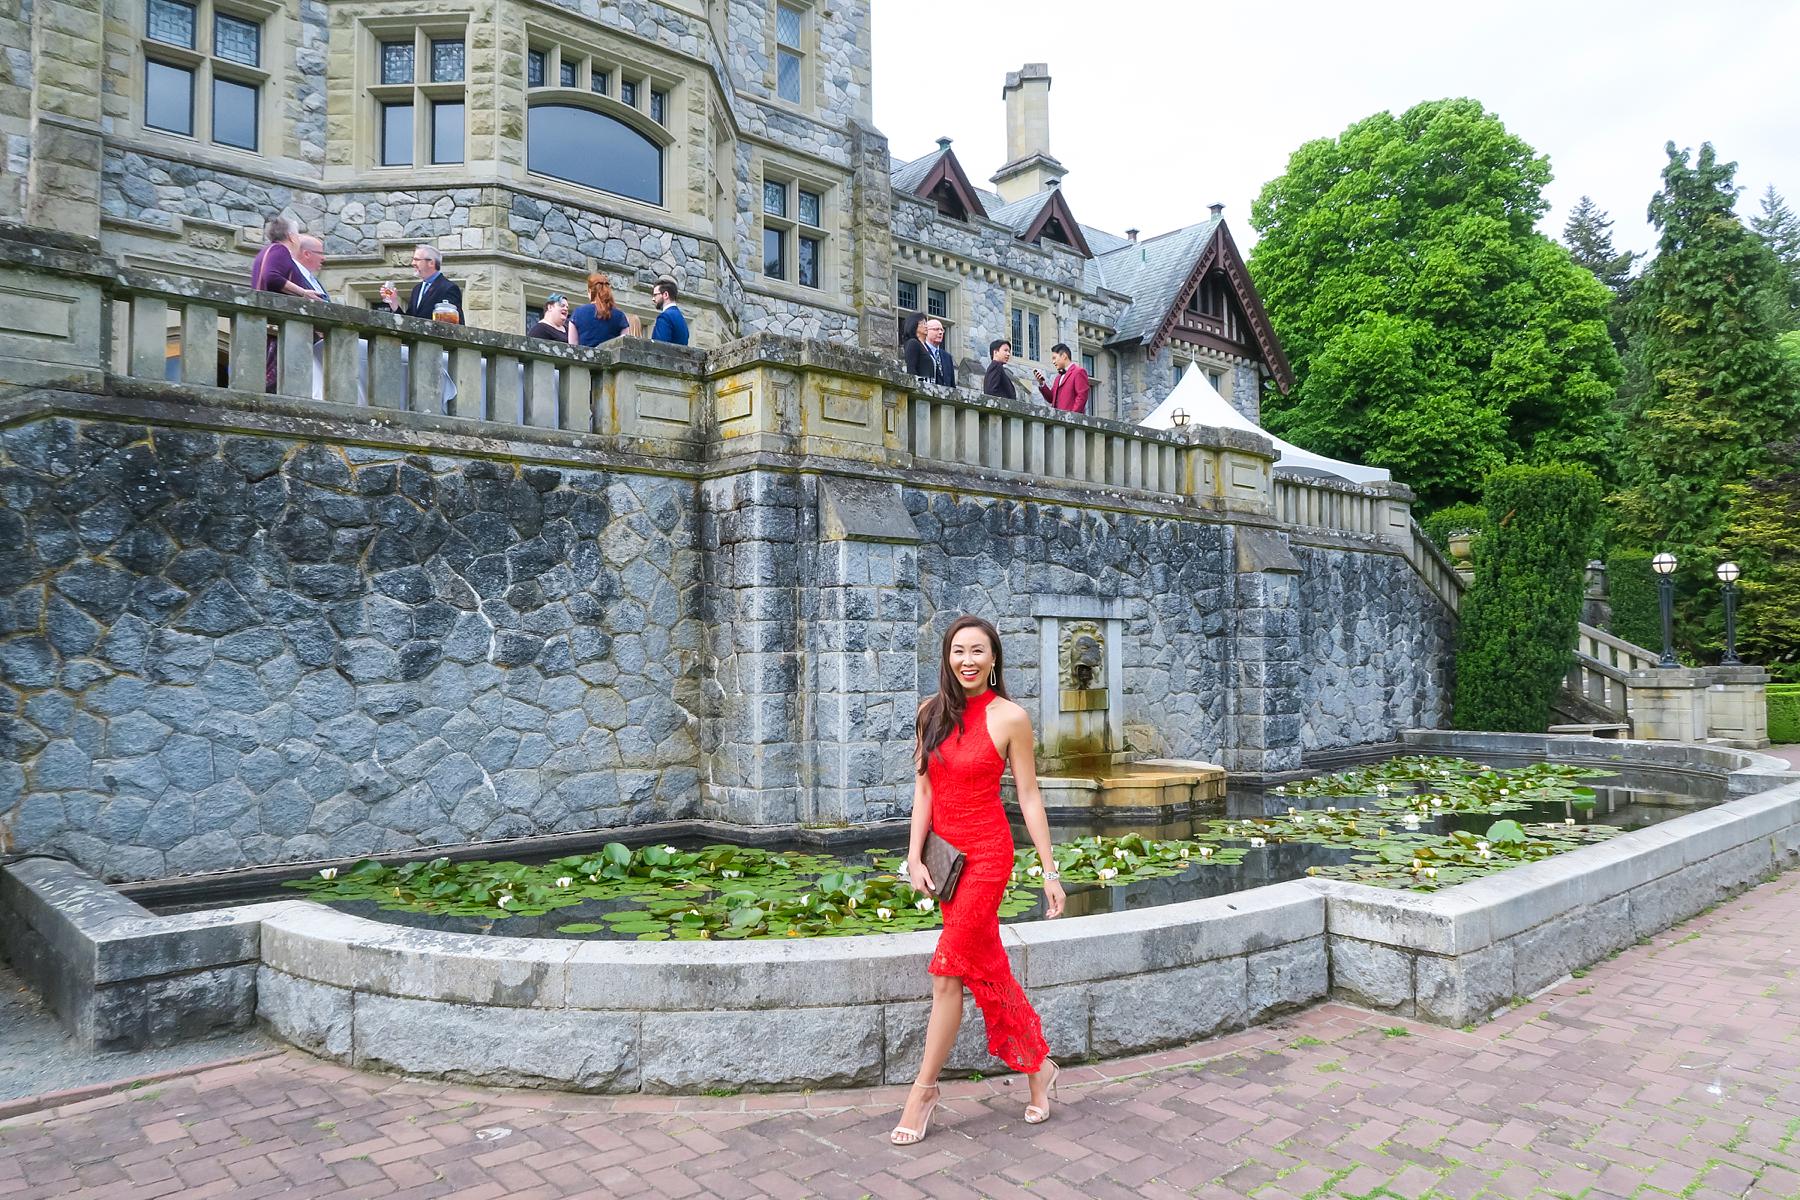 wedding at hatley castle wedding in Victoria Canada wearing a red lace dress like the emoji